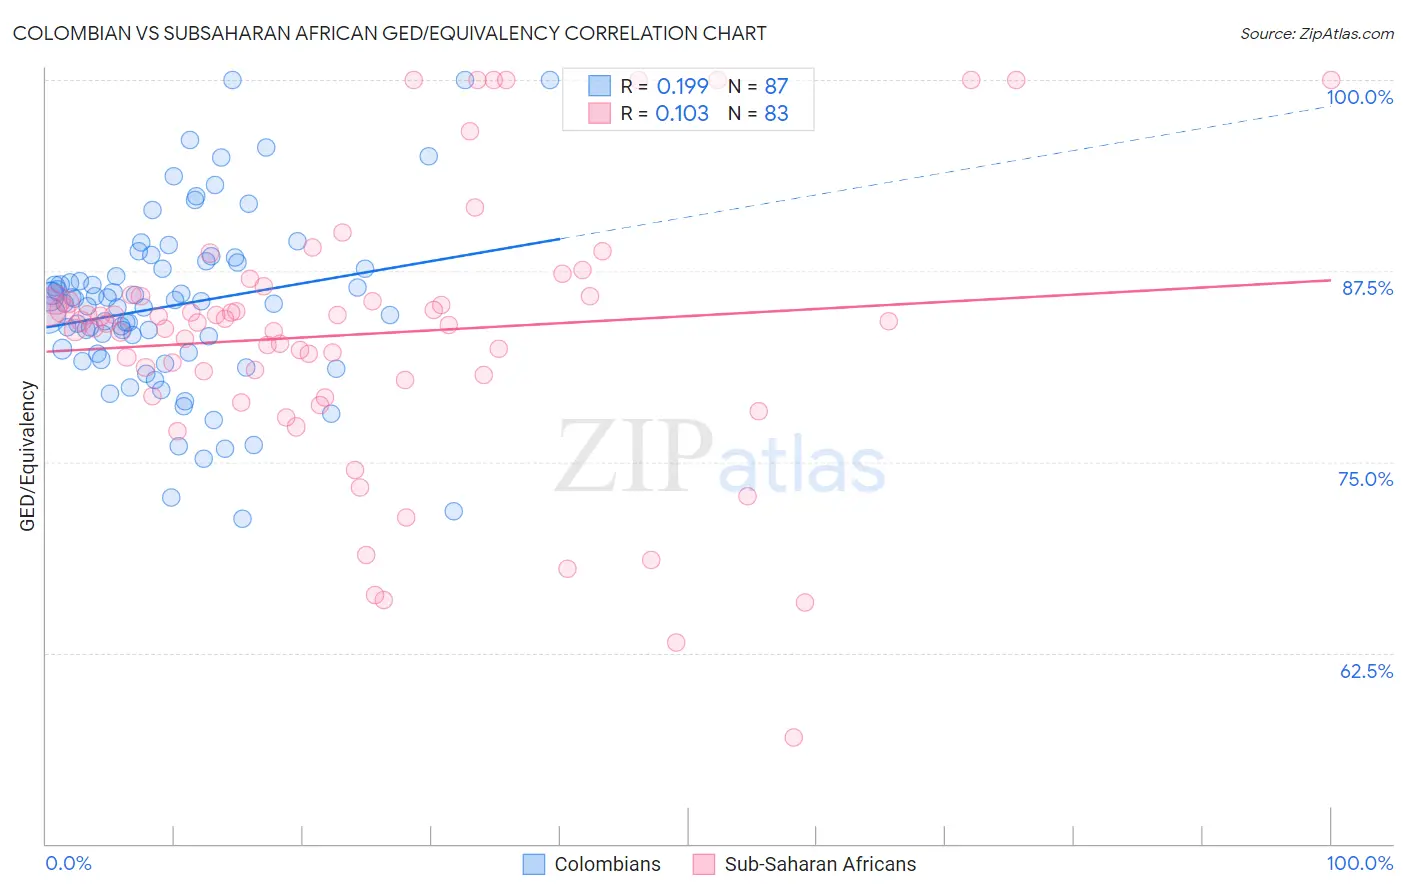 Colombian vs Subsaharan African GED/Equivalency